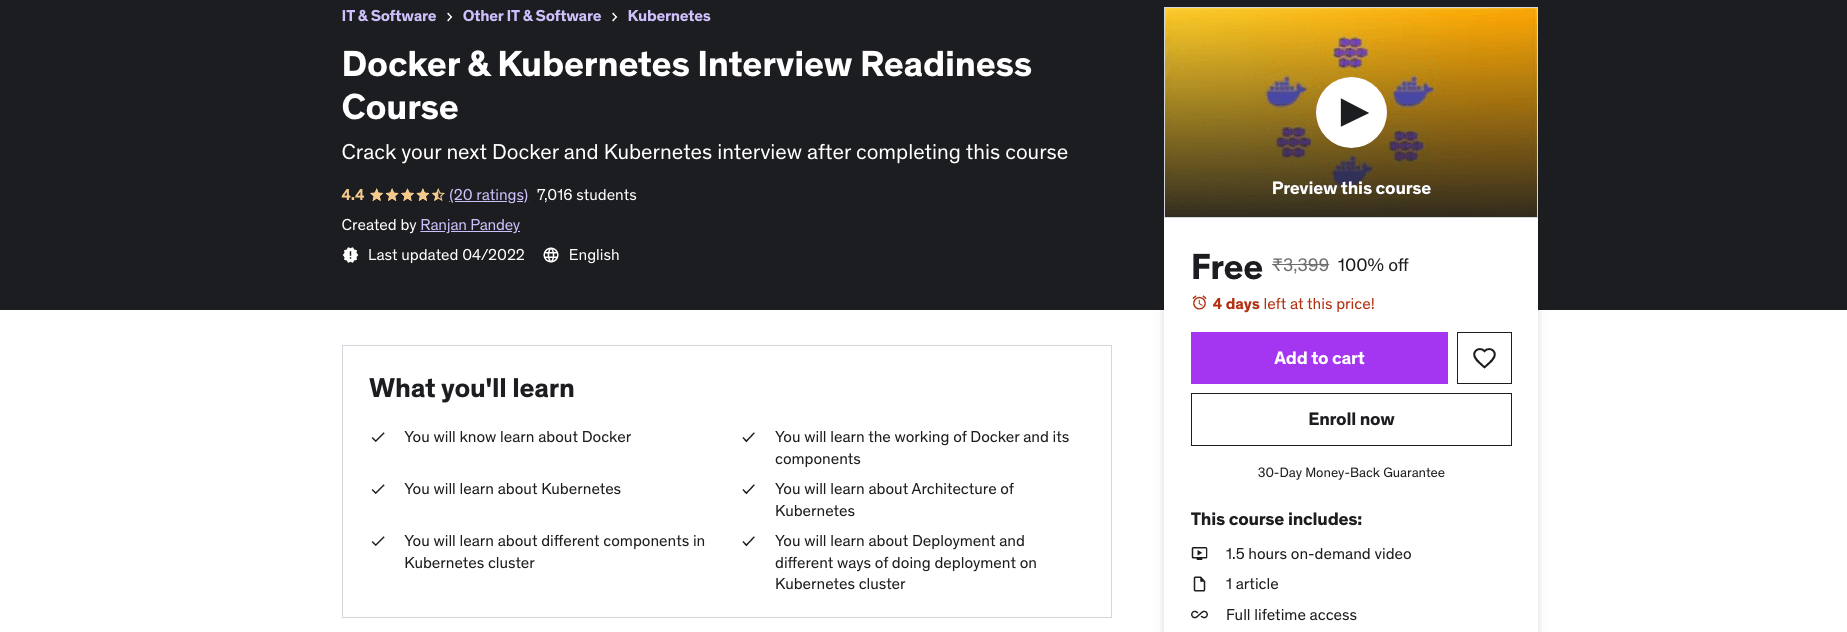 Docker & Kubernetes Interview Readiness Course